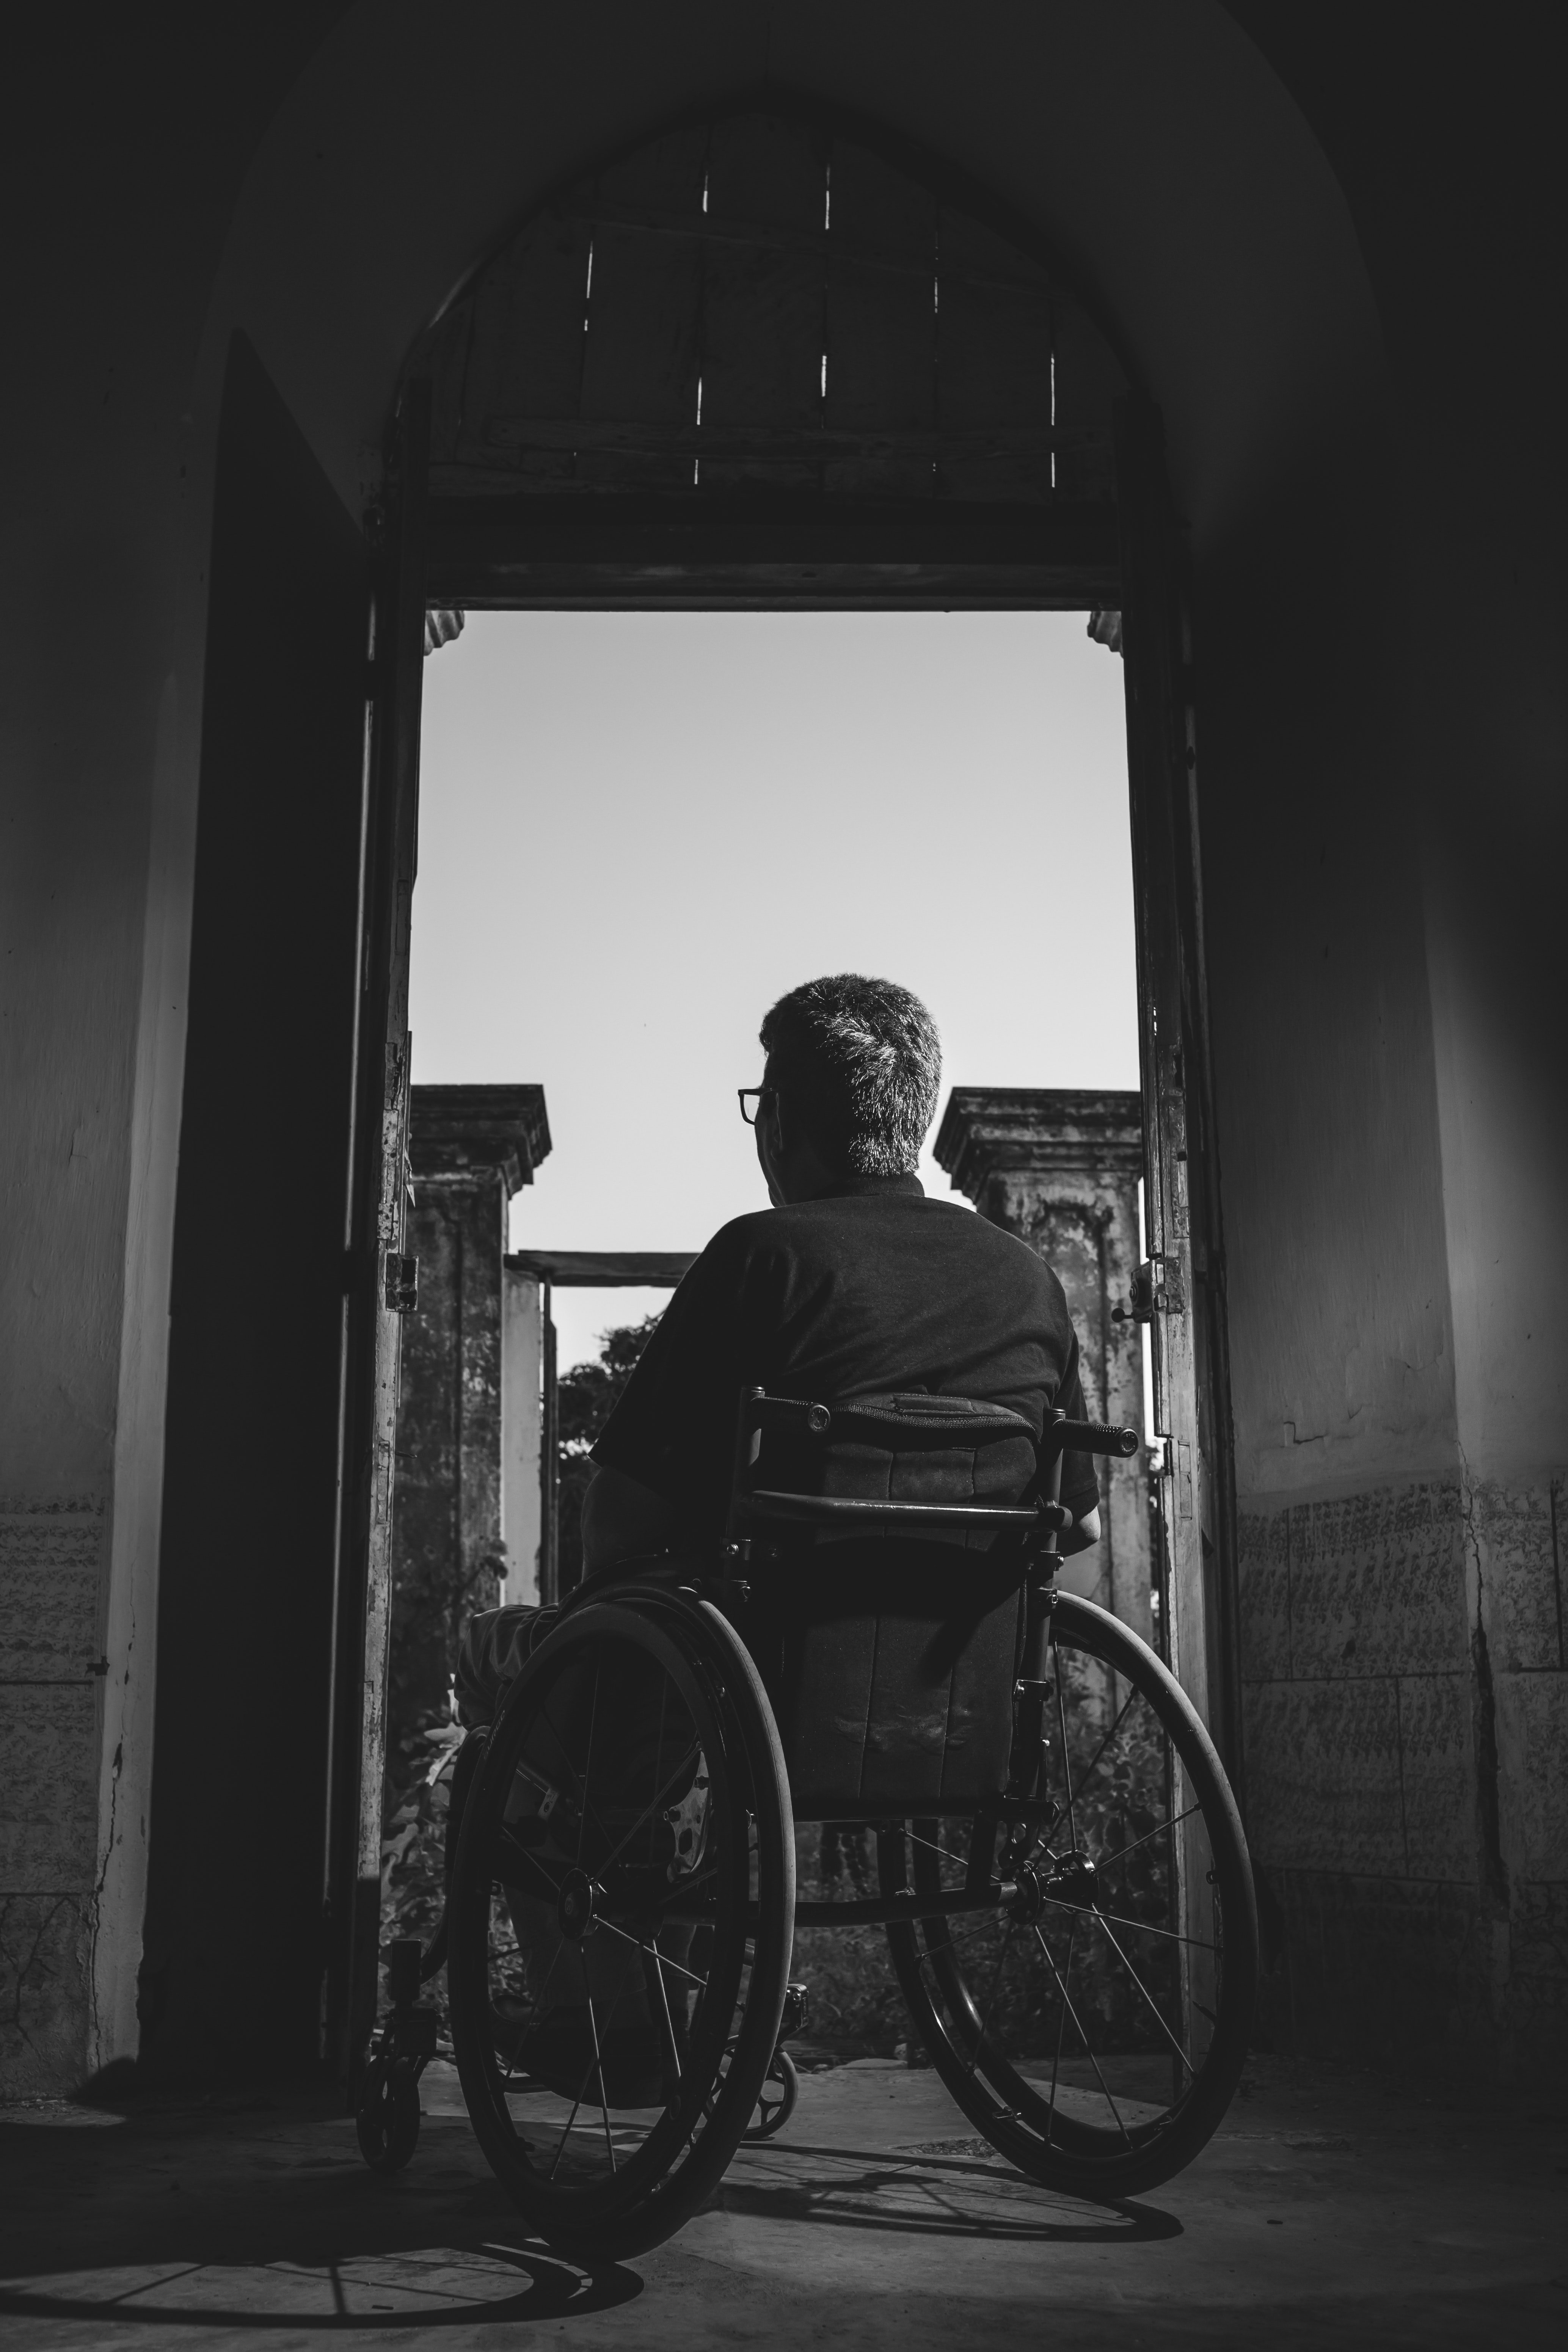 Daniel was confined to a wheelchair after a spinal injury | Photo: Pexels